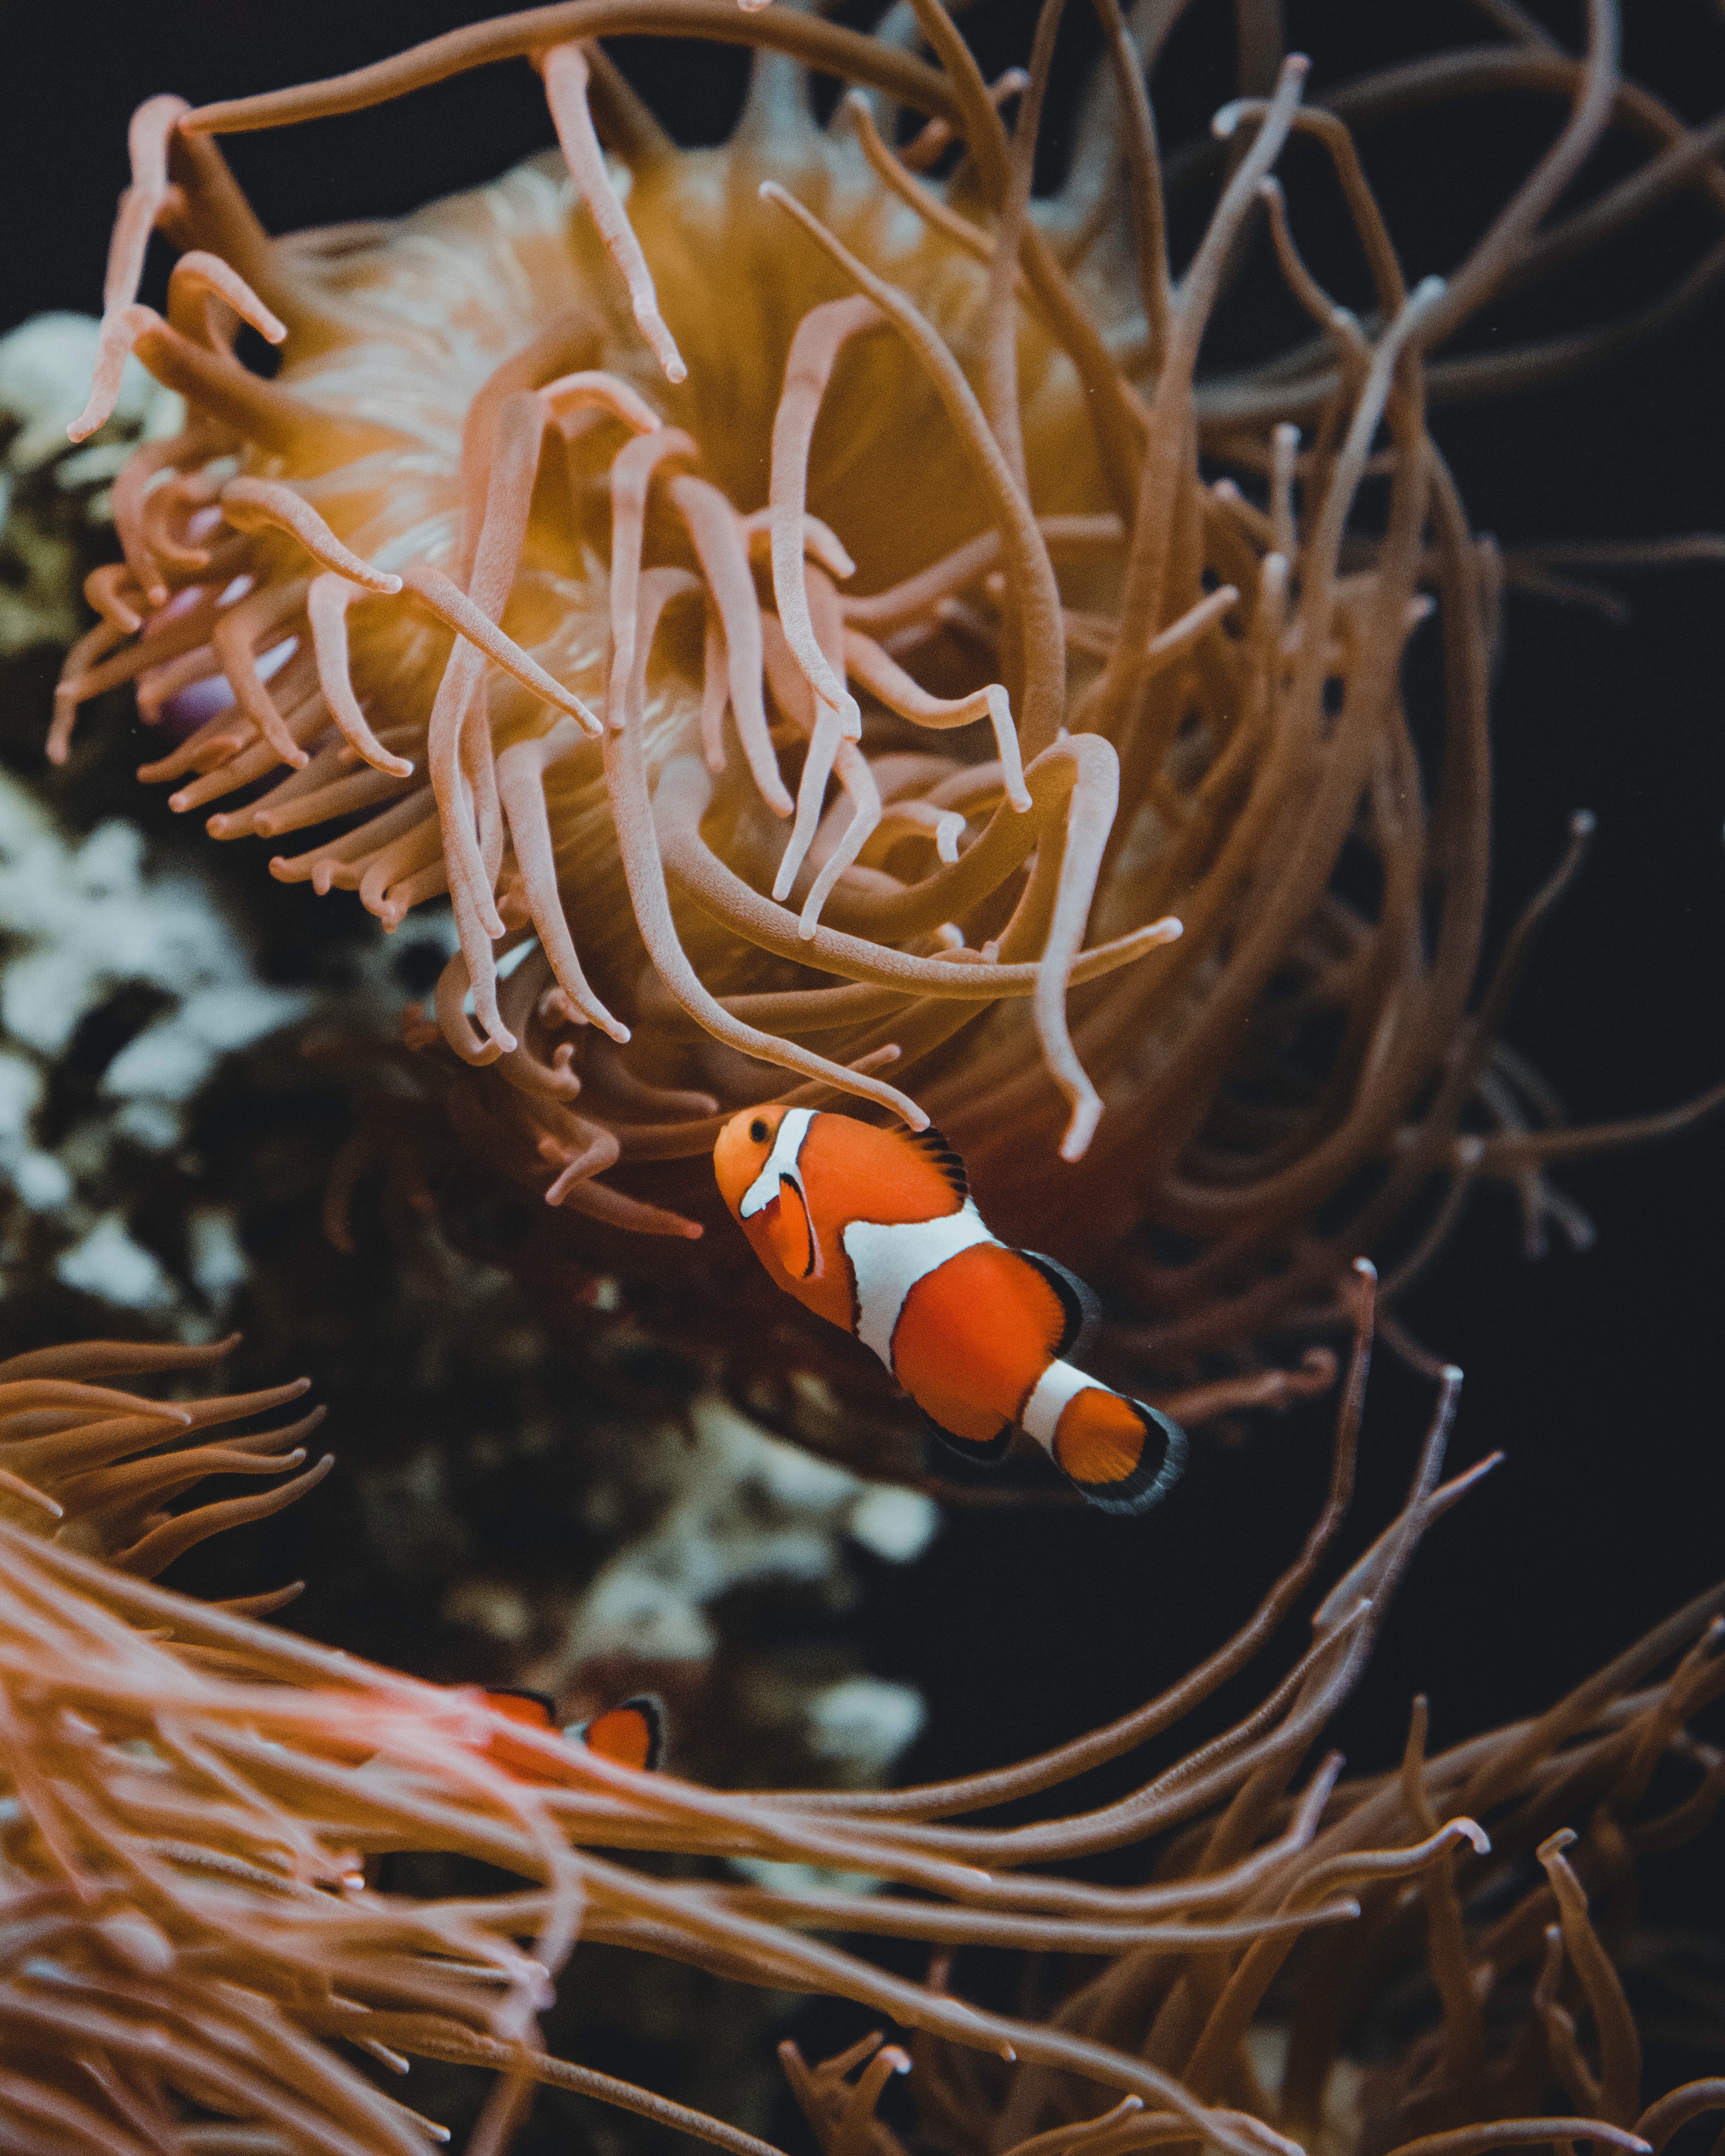 56583 download wallpaper animals, coral, clown fish, fish, seaweed, algae, underwater, submarine, fish clown, reef screensavers and pictures for free